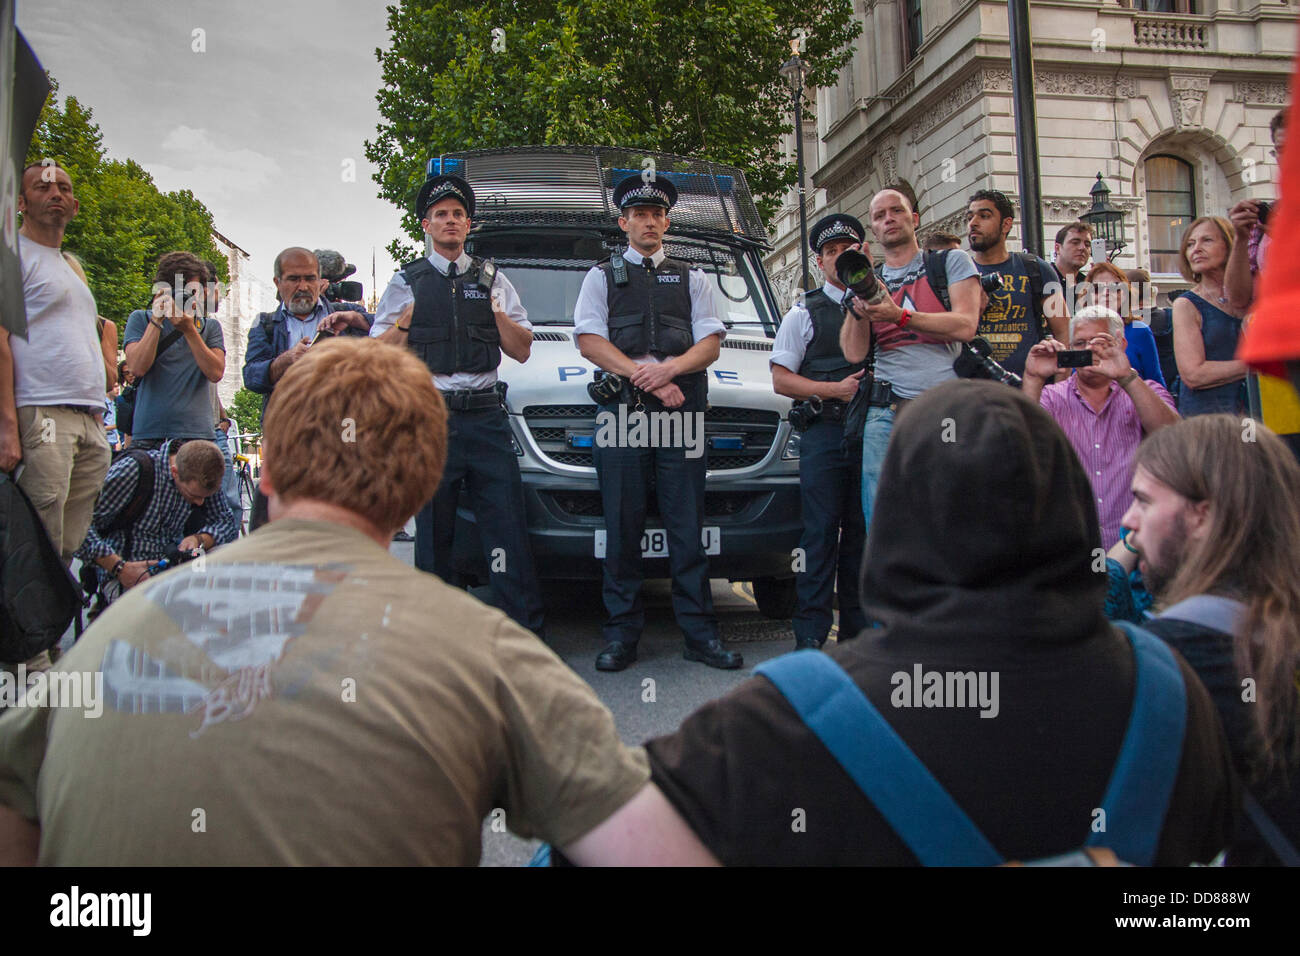 London, UK. 28th Aug, 2013. Police look on as activists block Whitehall during a protest against possible intervention by the UK in the ongoing Syrian conflict following chemical weapons attacks, Blamed on the Assad regime, on civilians. Credit:  Paul Davey/Alamy Live News Stock Photo